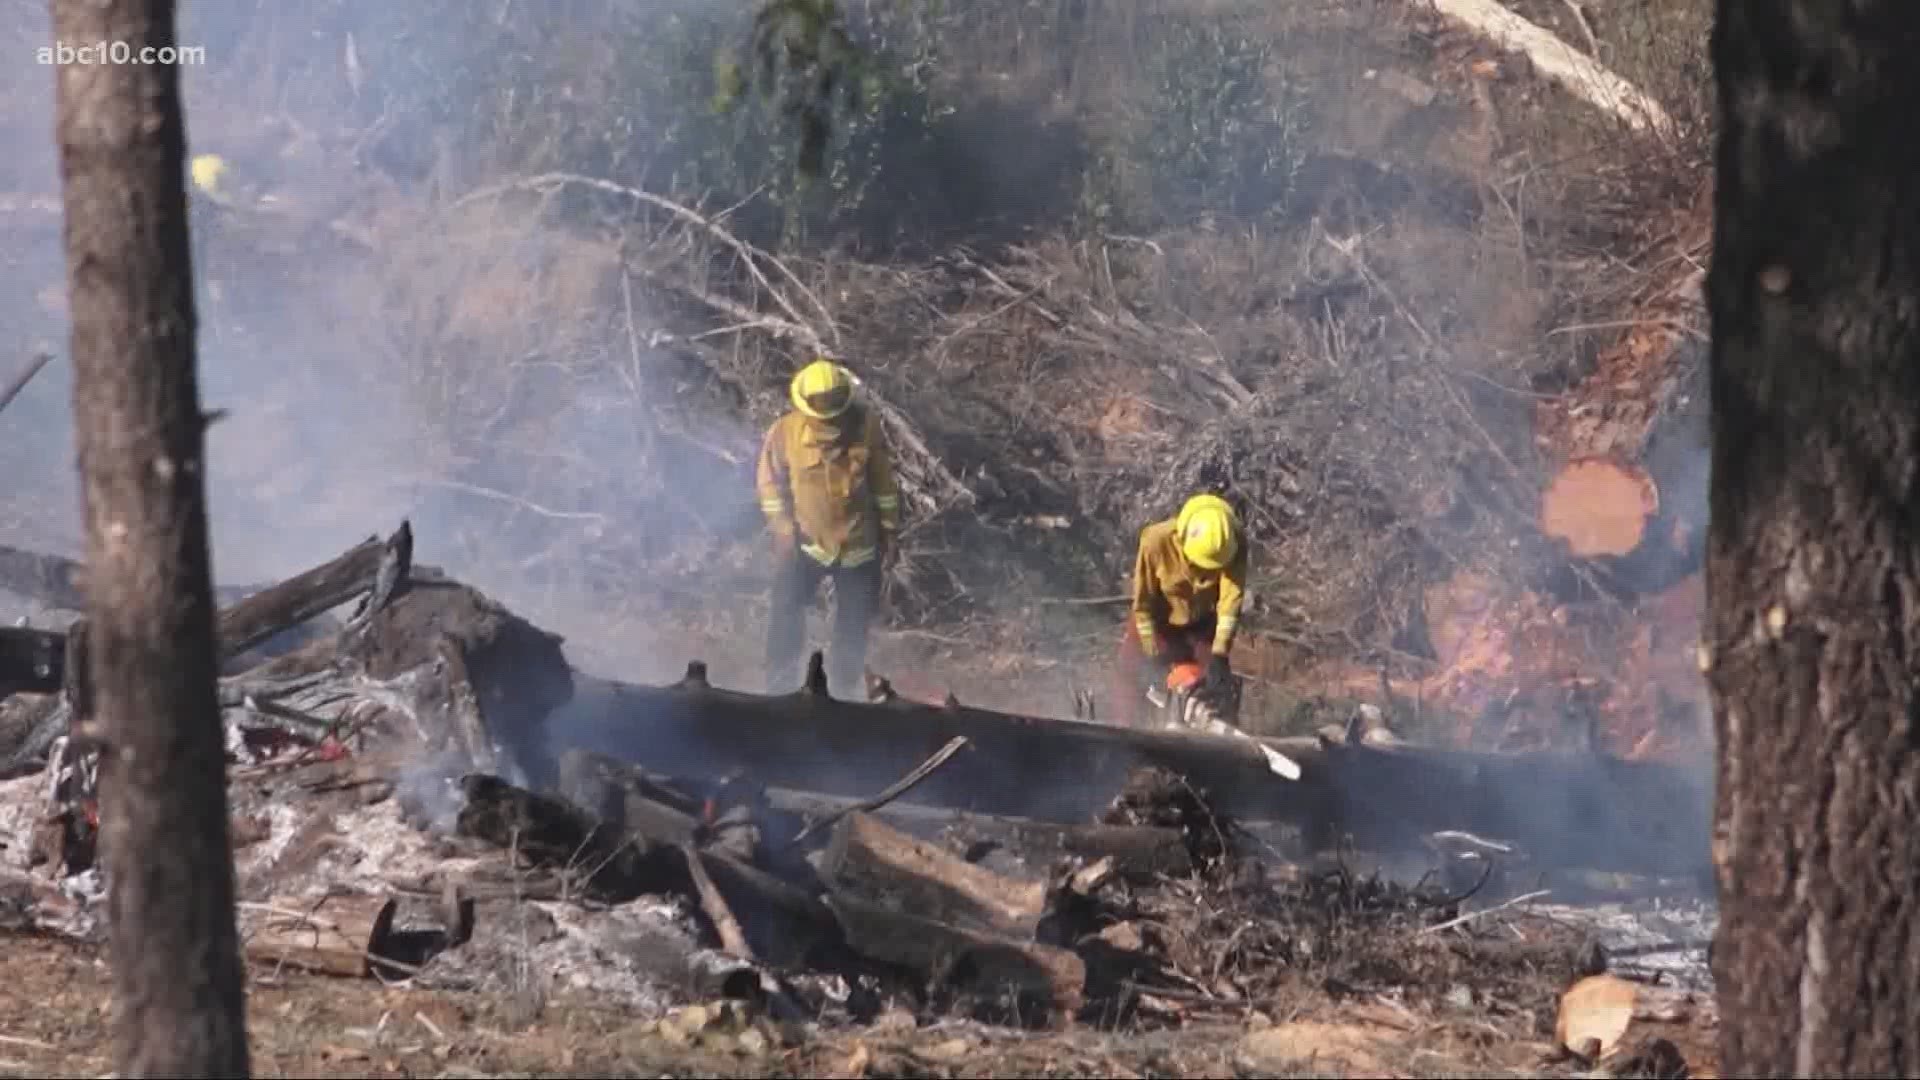 Officials are making necessary changes to keep social distancing practices and keeping fire crews safe as they start battling the fires.